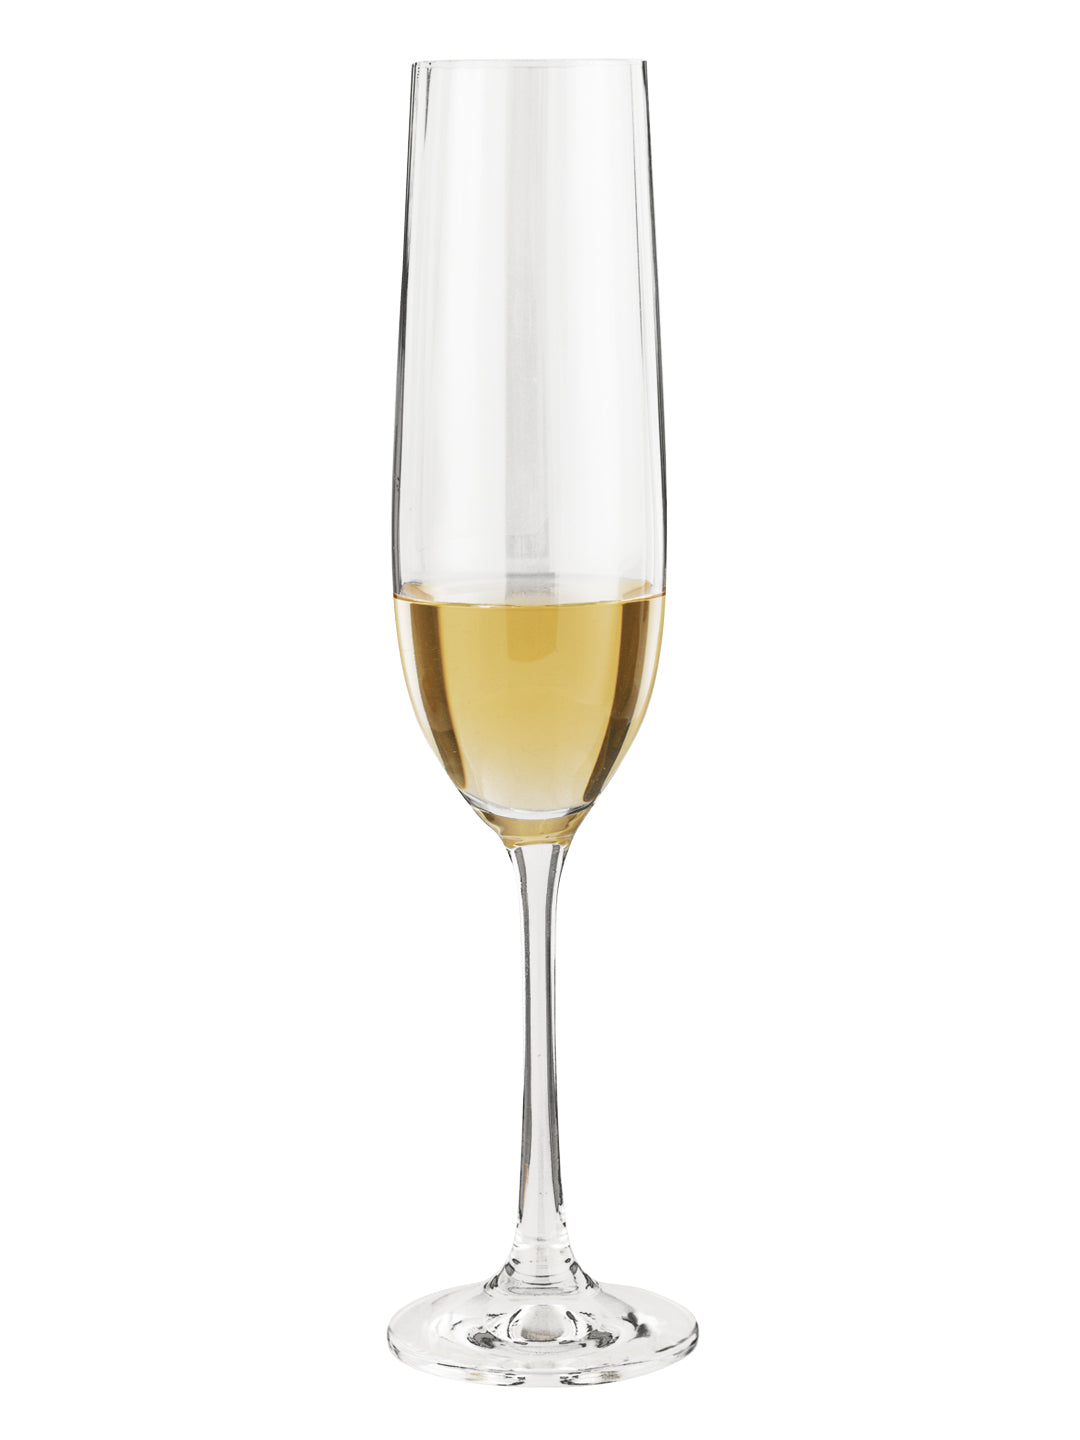 QUINTESSENTIAL CHAMPAGNE GLASS - CRAFTED IN EUROPE - SET OF 4